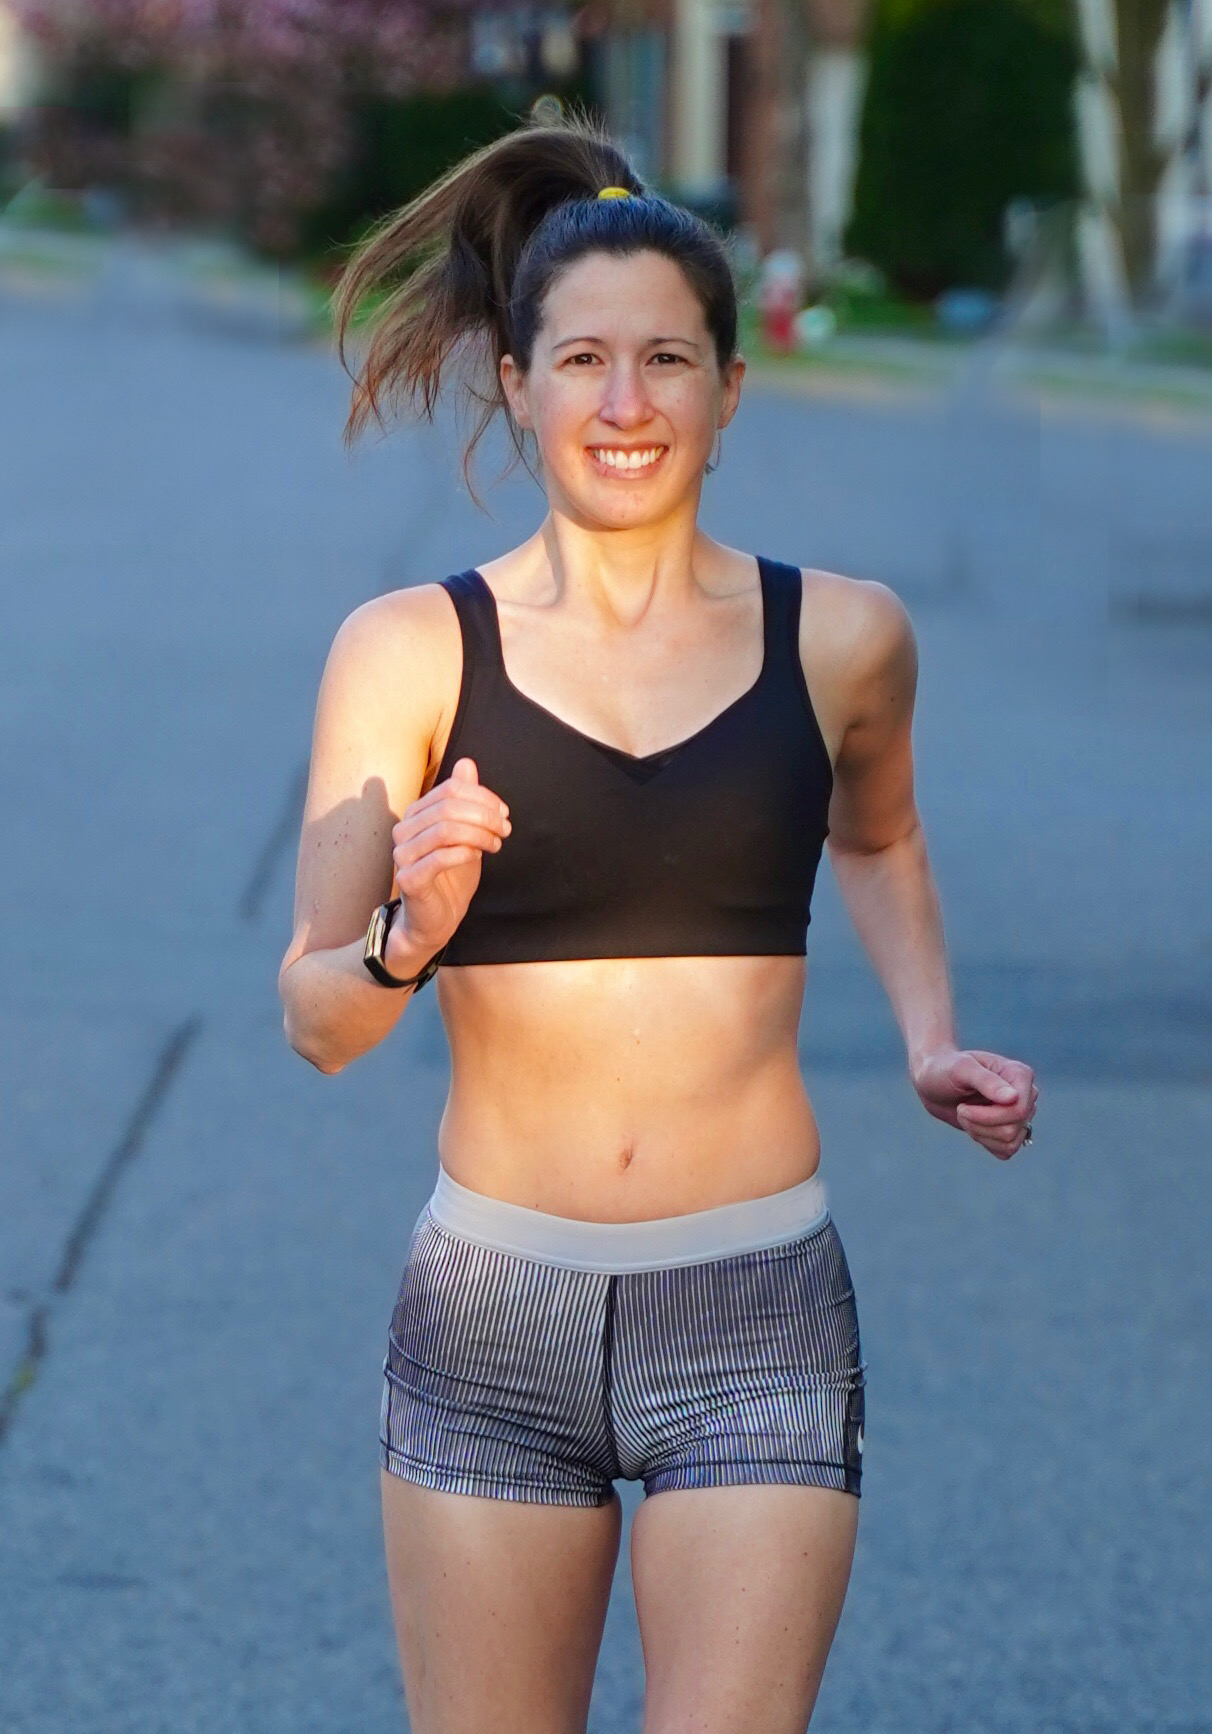 Research finds running in the wrong sized sports bra shortens your stride